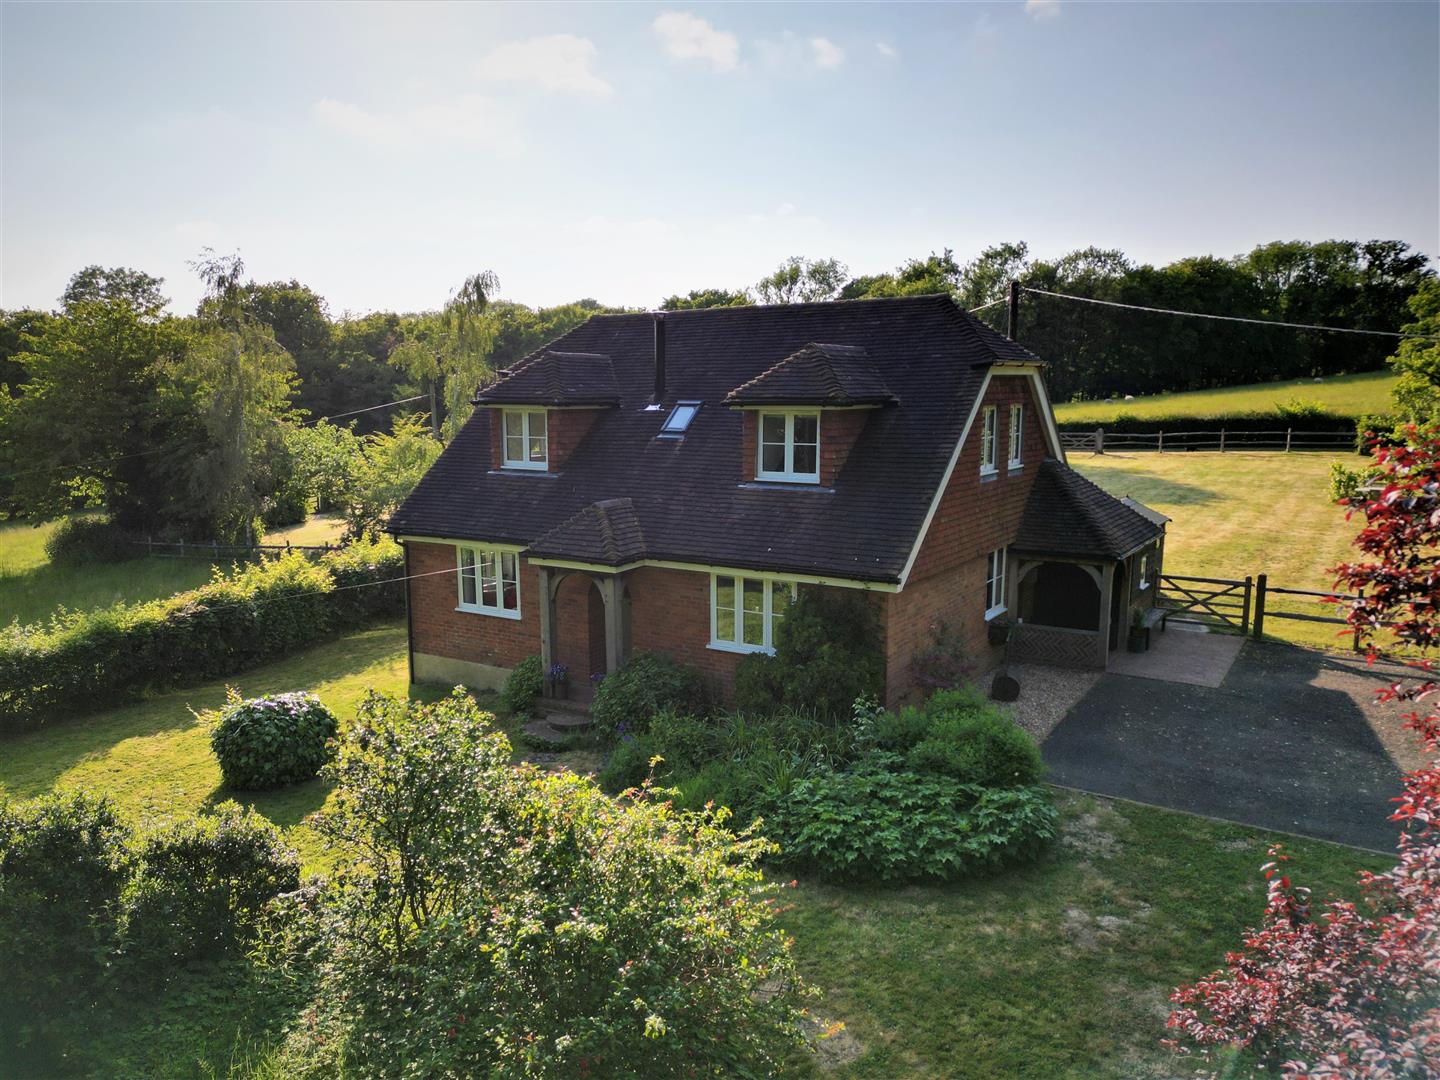 4 bed detached house for sale in Borders Lane, Etchingham - Property Image 1